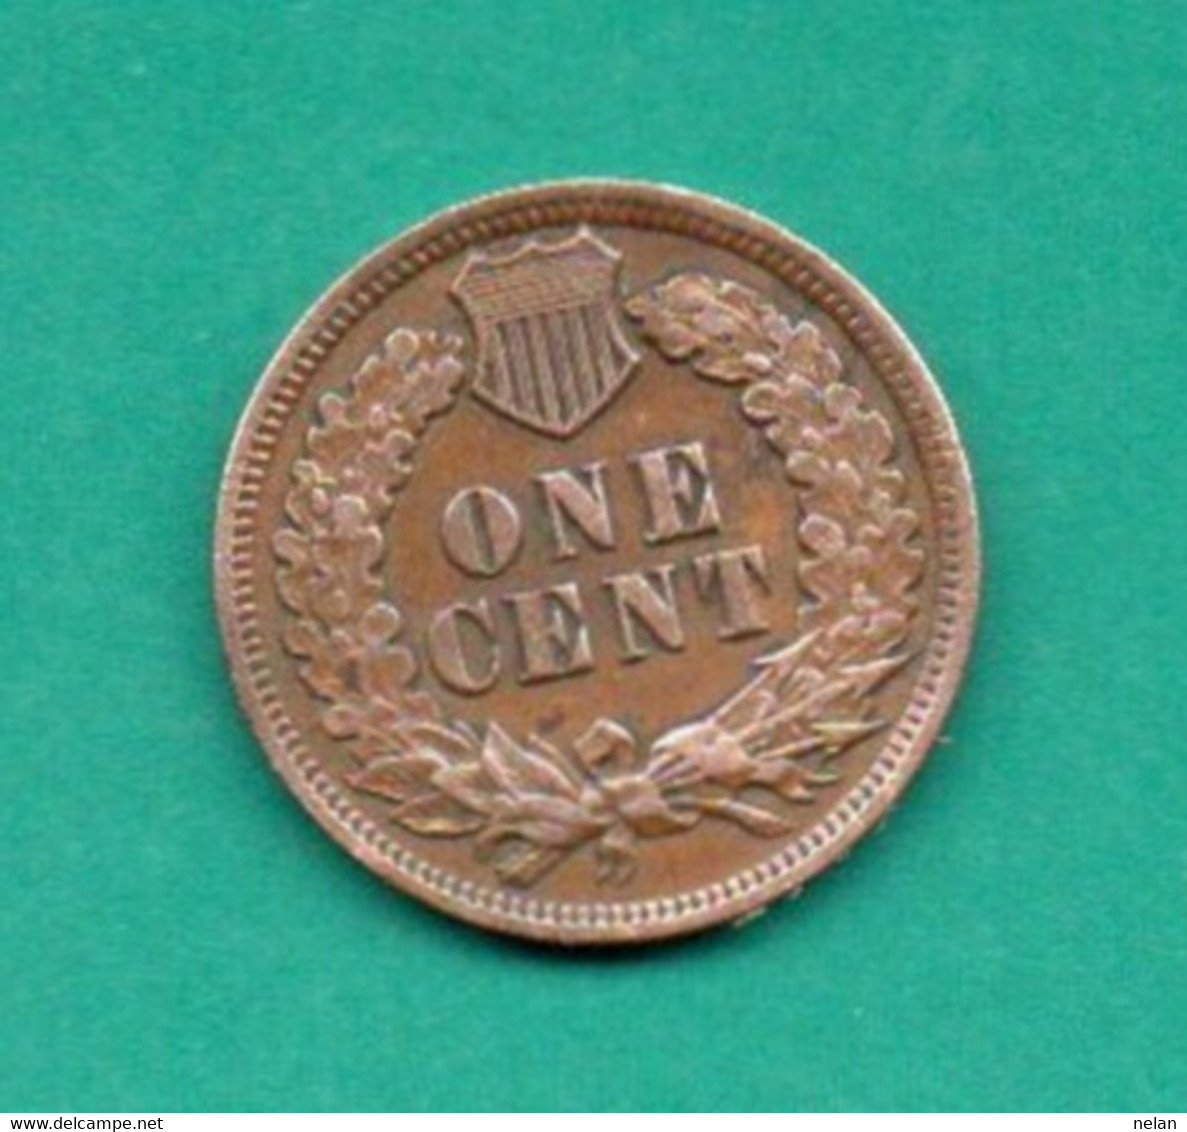 UNITED STATES OF AMERICA  1 CENT 1902  (Indian Head) KM-90a - 1859-1909: Indian Head